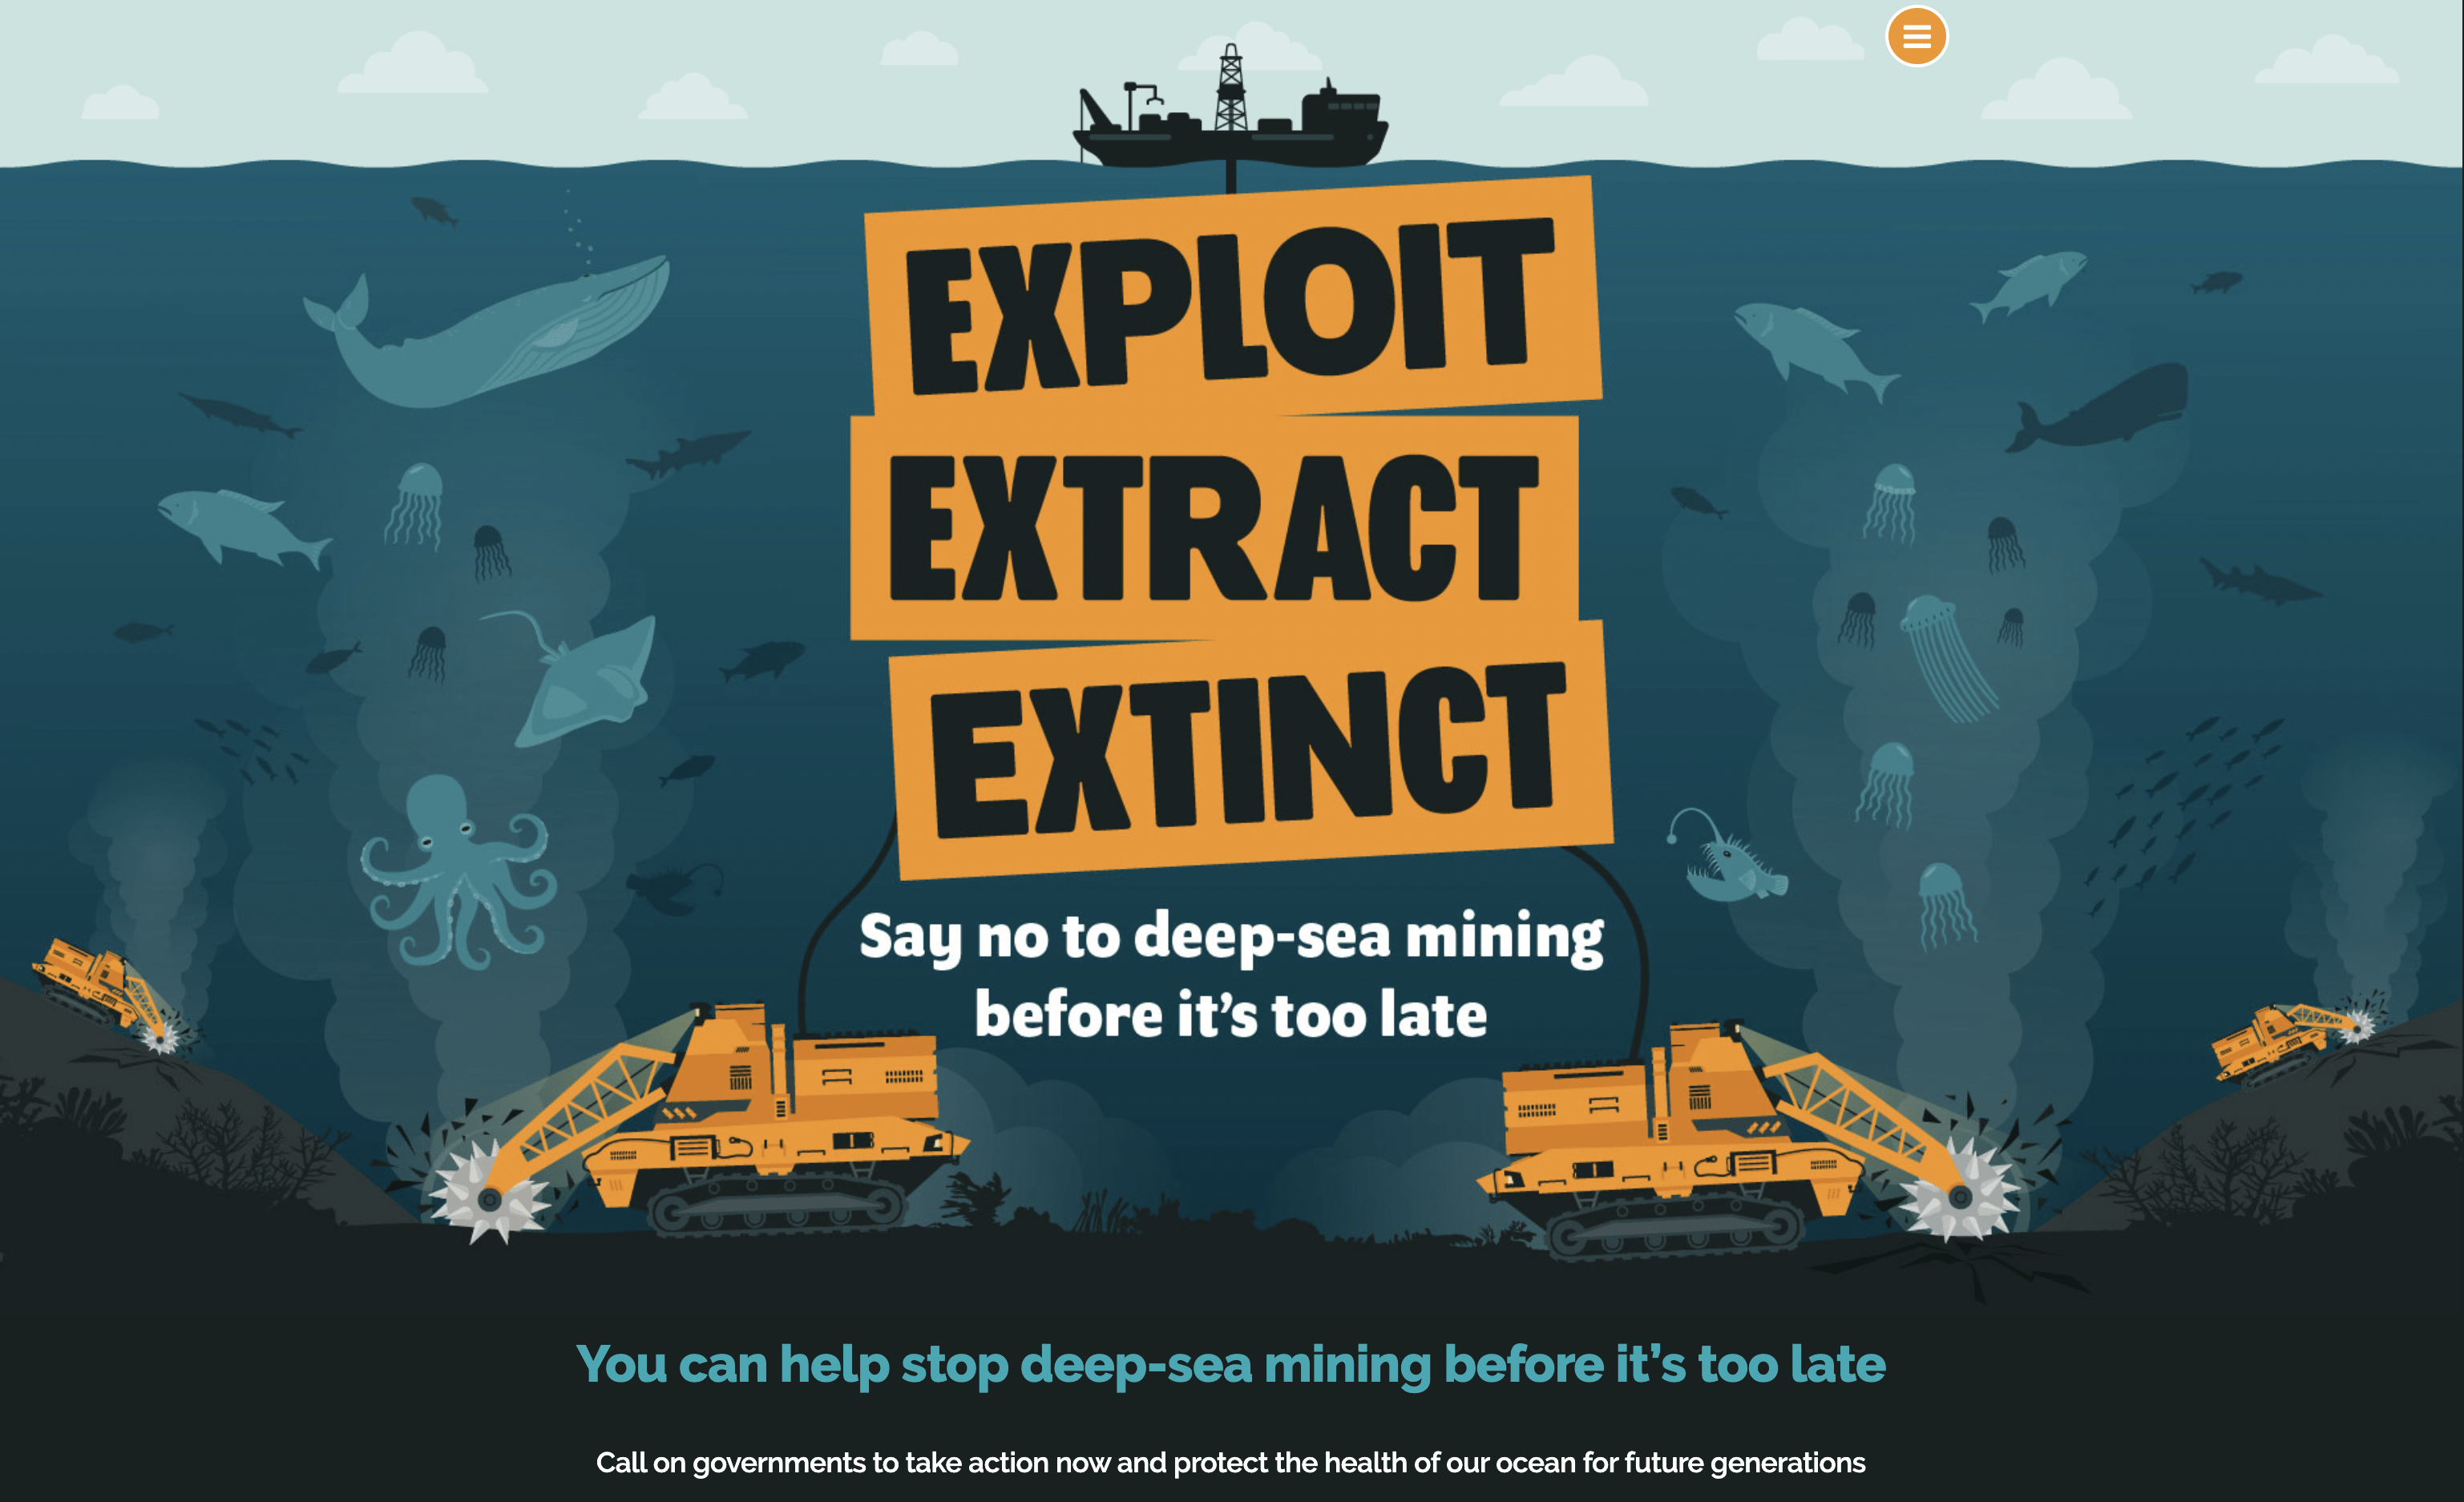 Fraphic image of the ocean with text that is black on yellow saying "Exploit, Extract, Extinct". The image calls on people to message their government officials to say no to deep sea mining